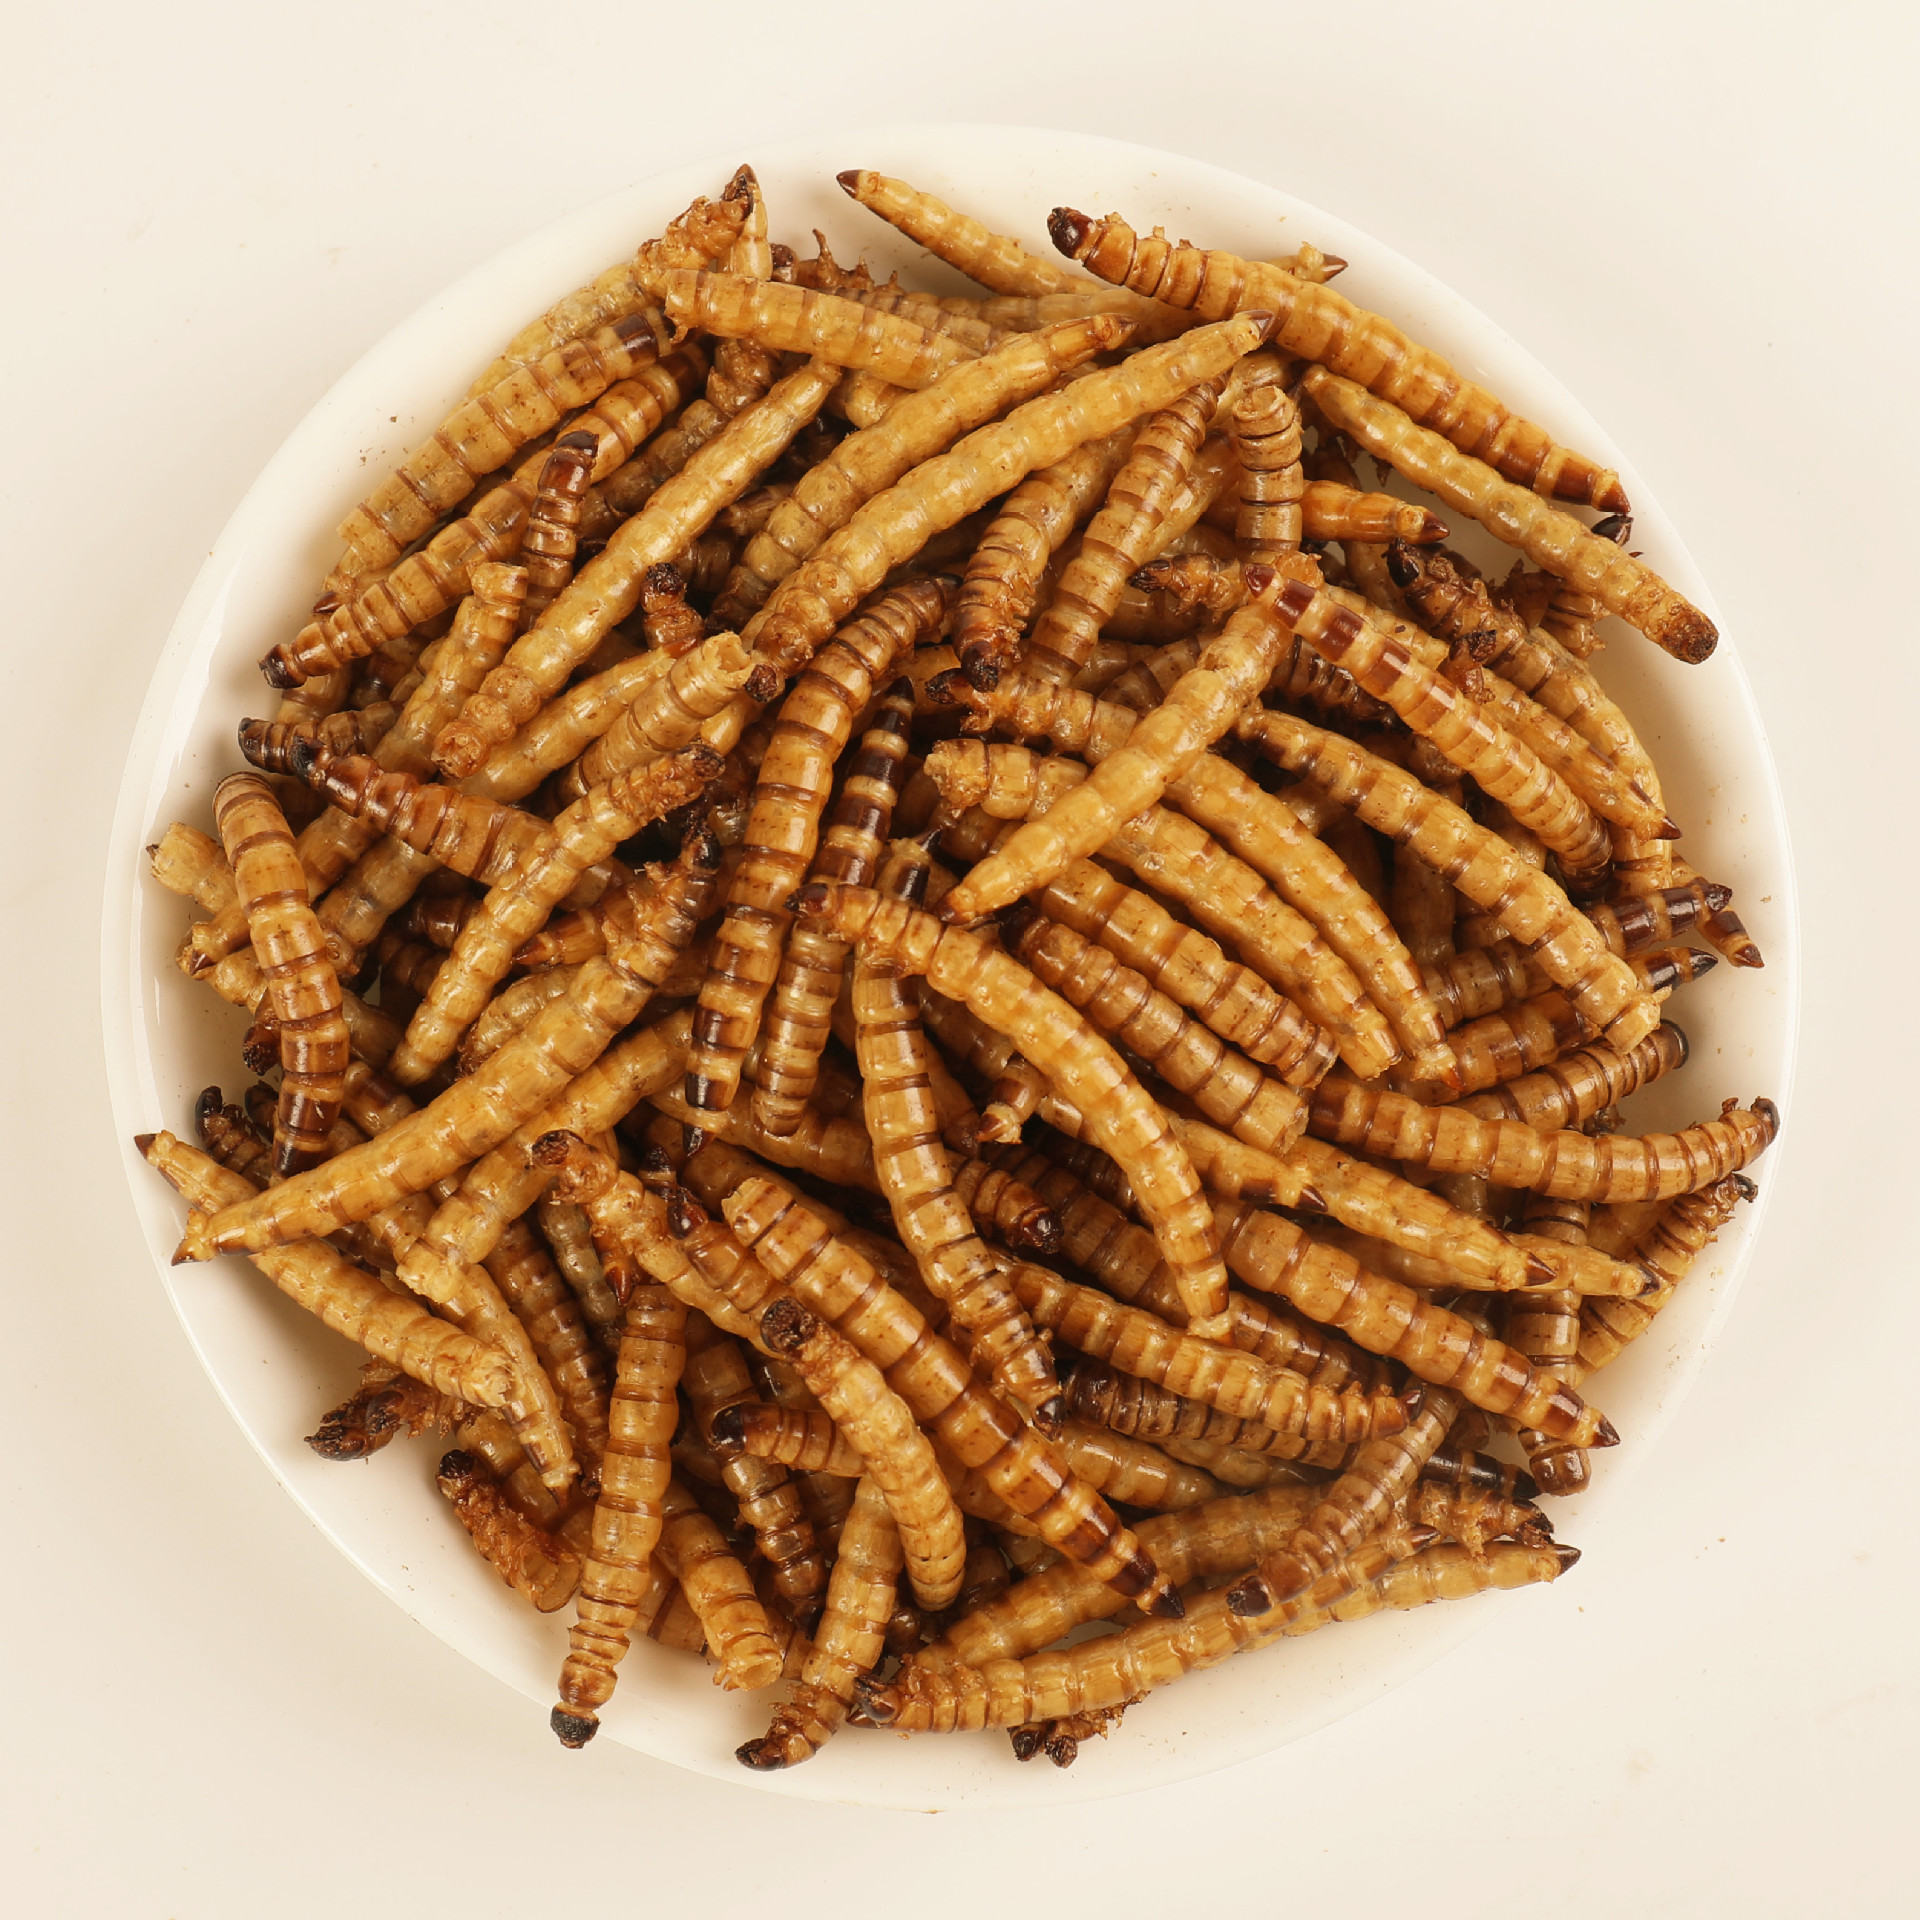 Dried Cricket Mealworm Grasshopper All Natural Pet Food